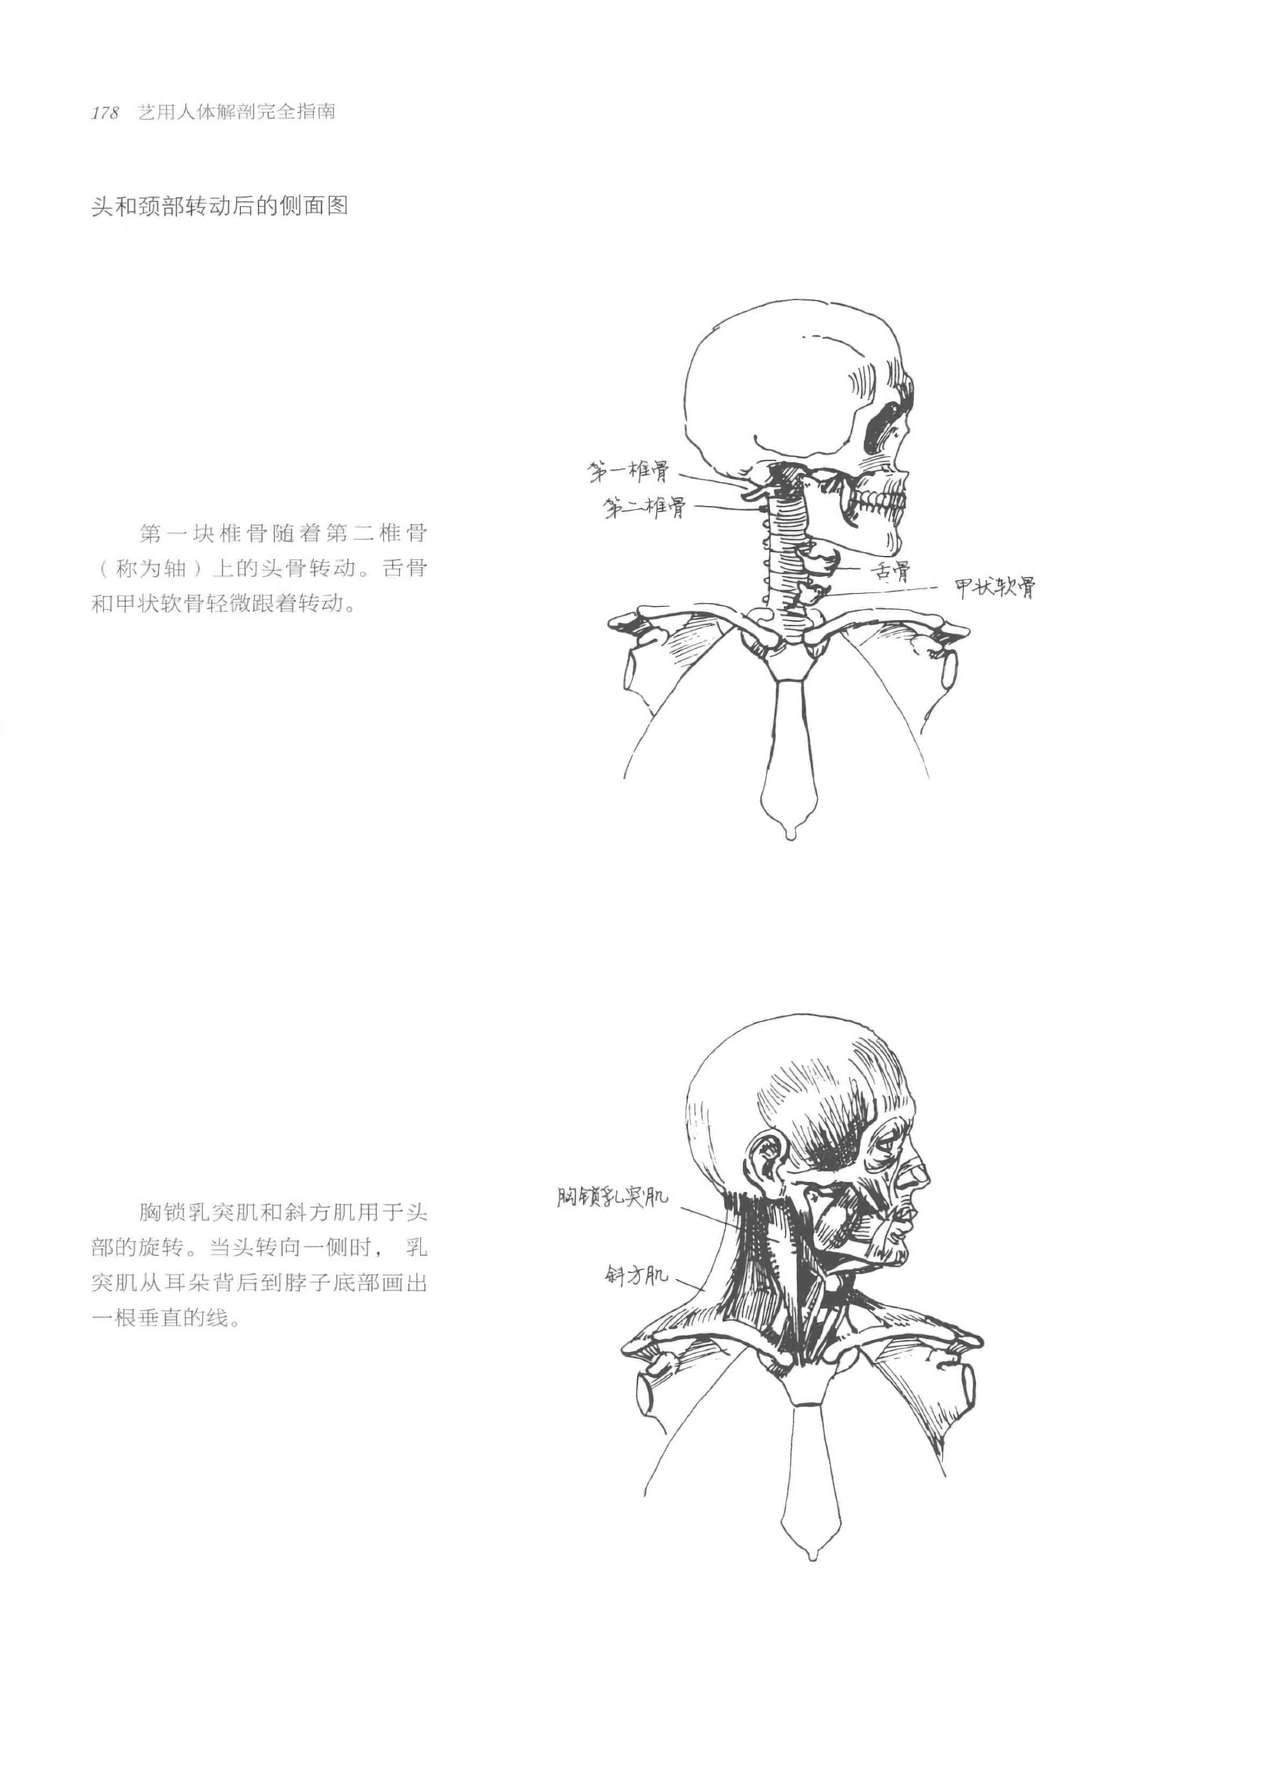 Anatomy-A Complete Guide for Artists - Joseph Sheppard [Chinese] 178